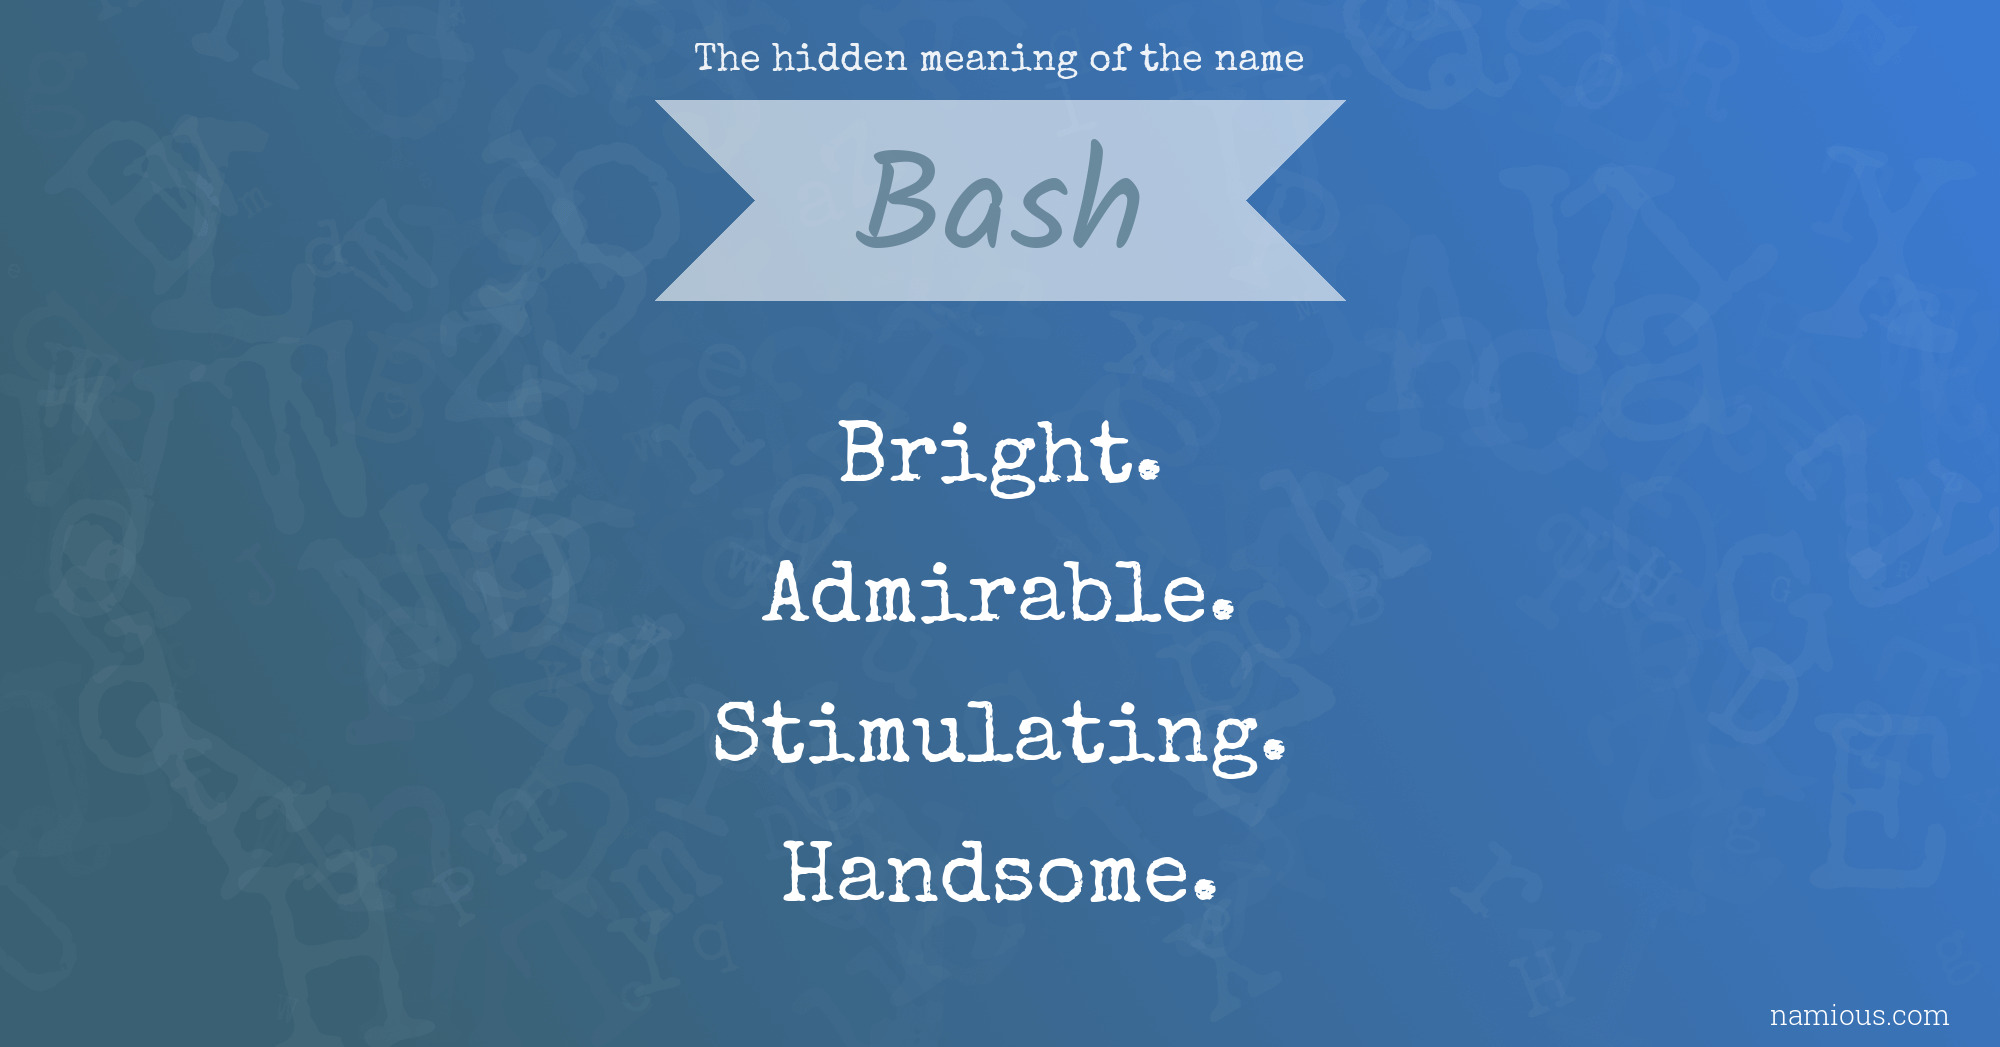 The hidden meaning of the name Bash